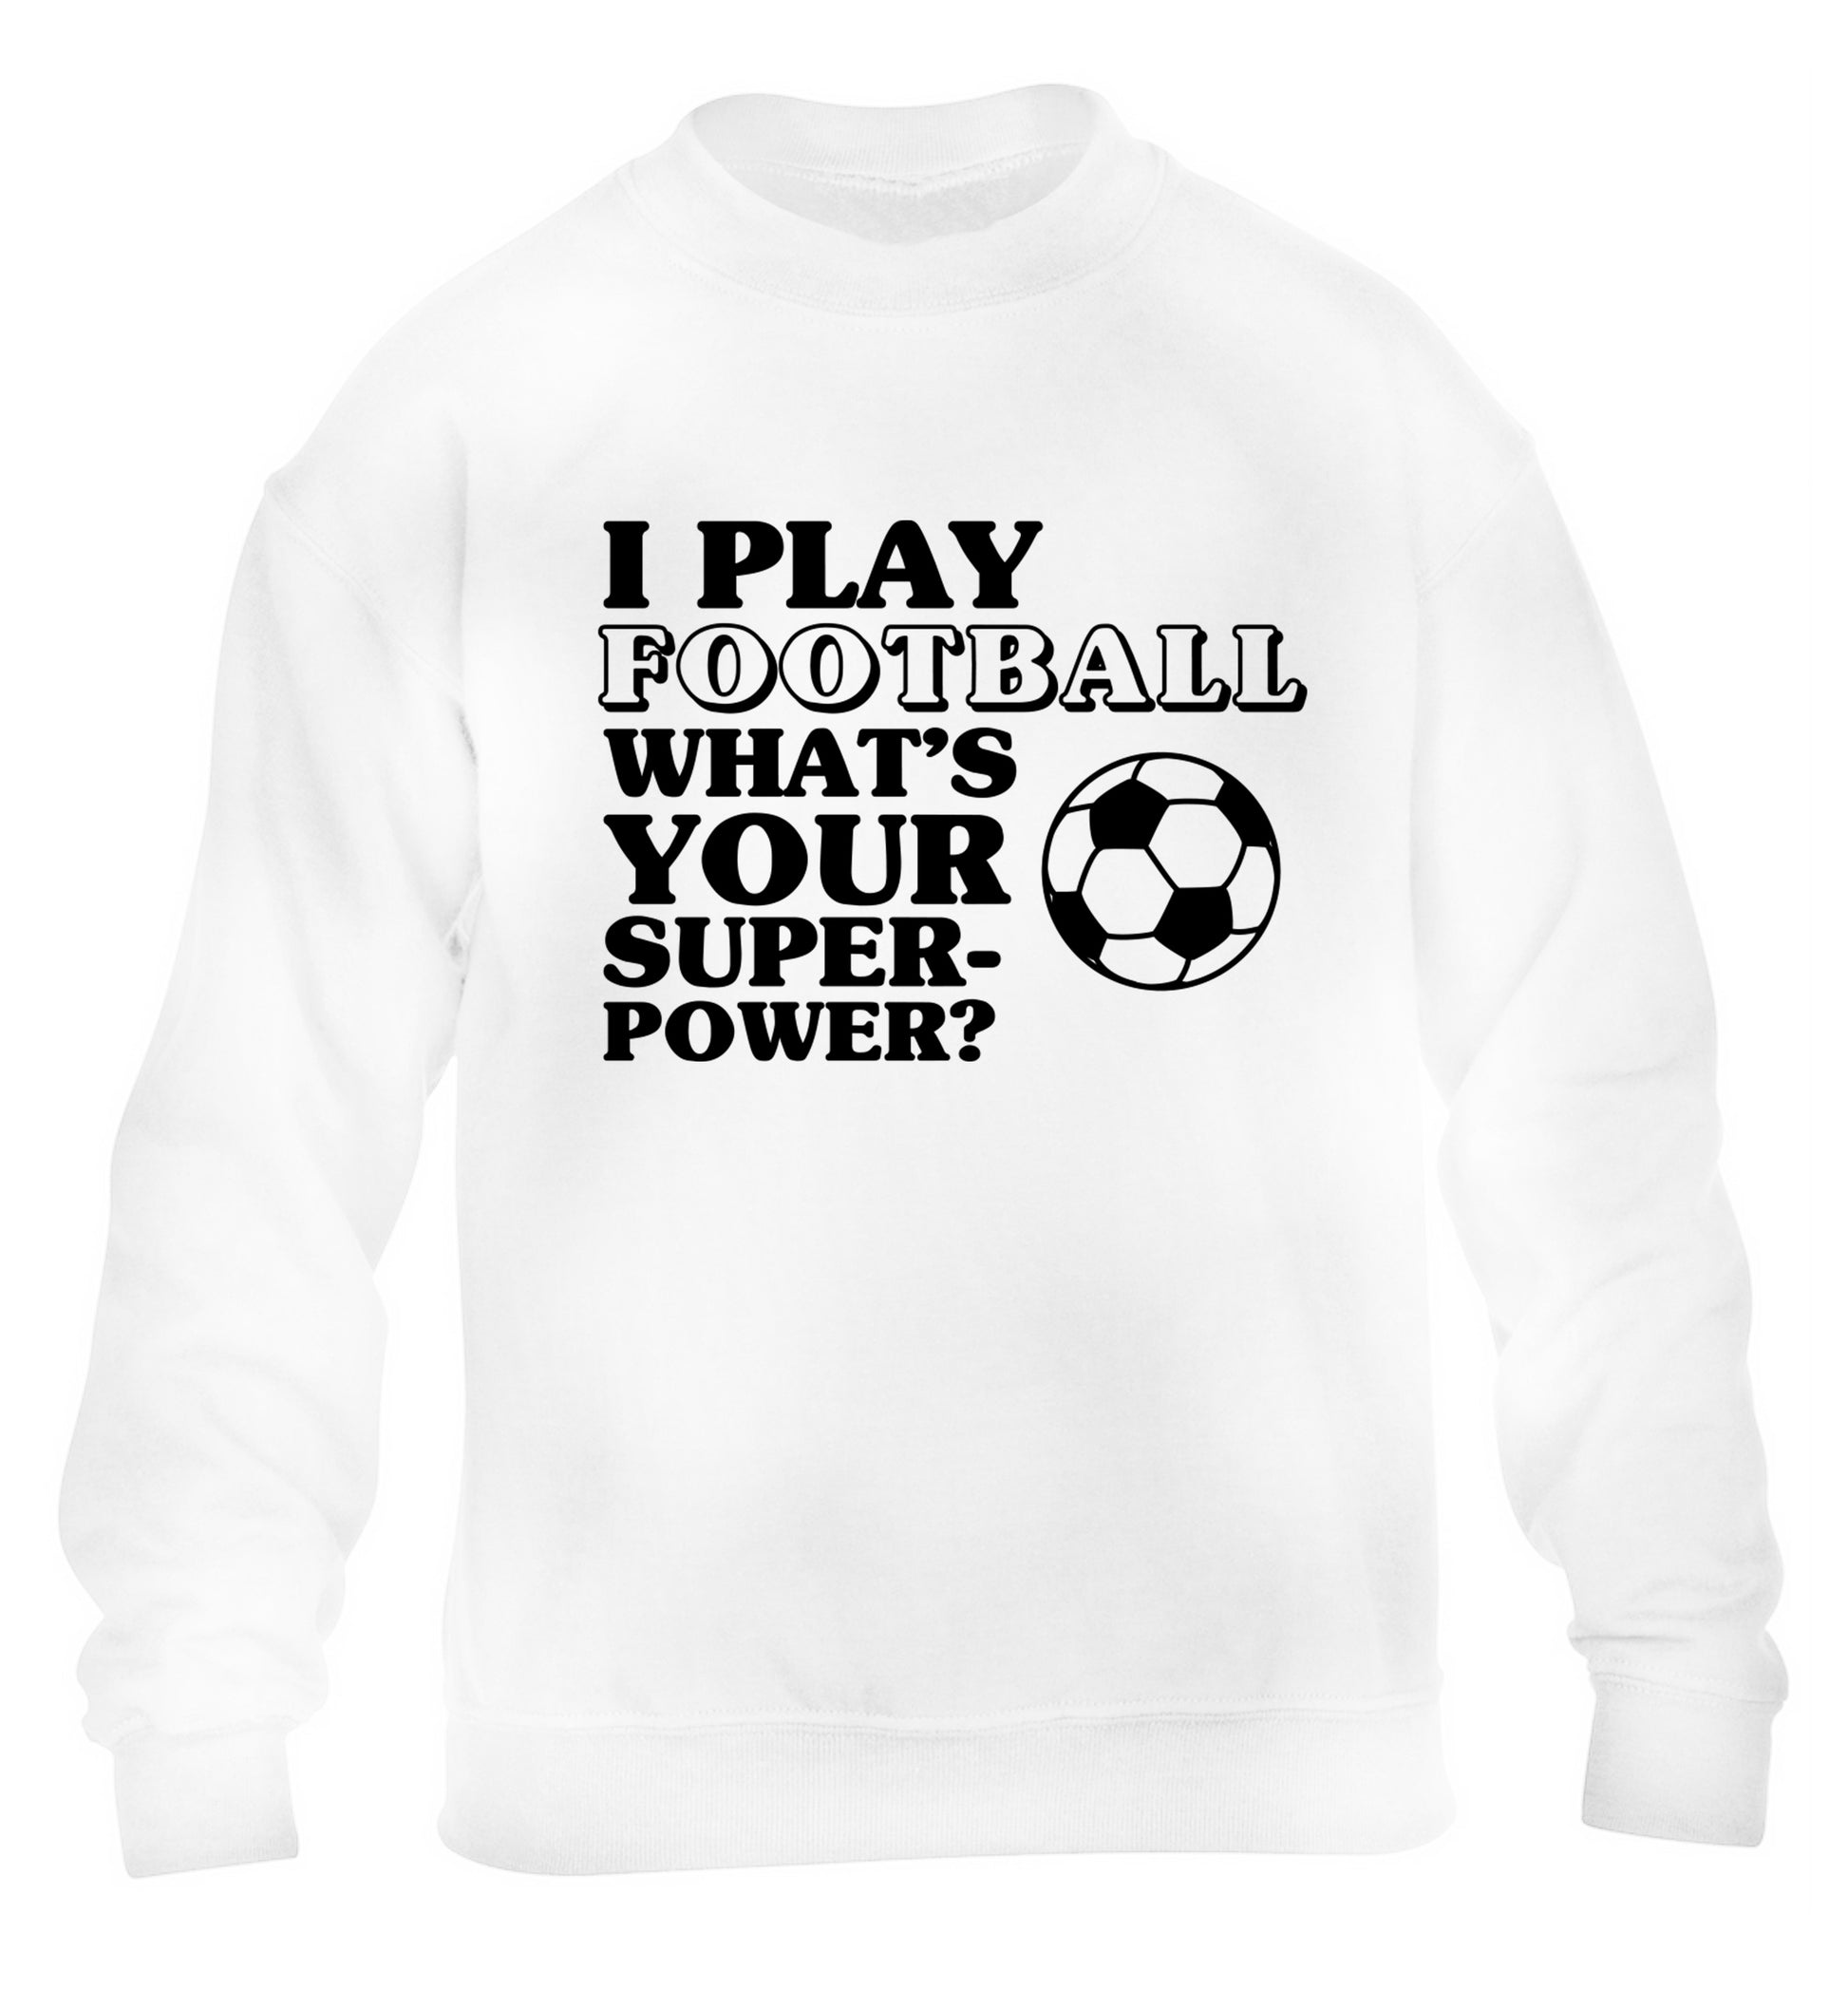 I play football what's your superpower? children's white sweater 12-14 Years